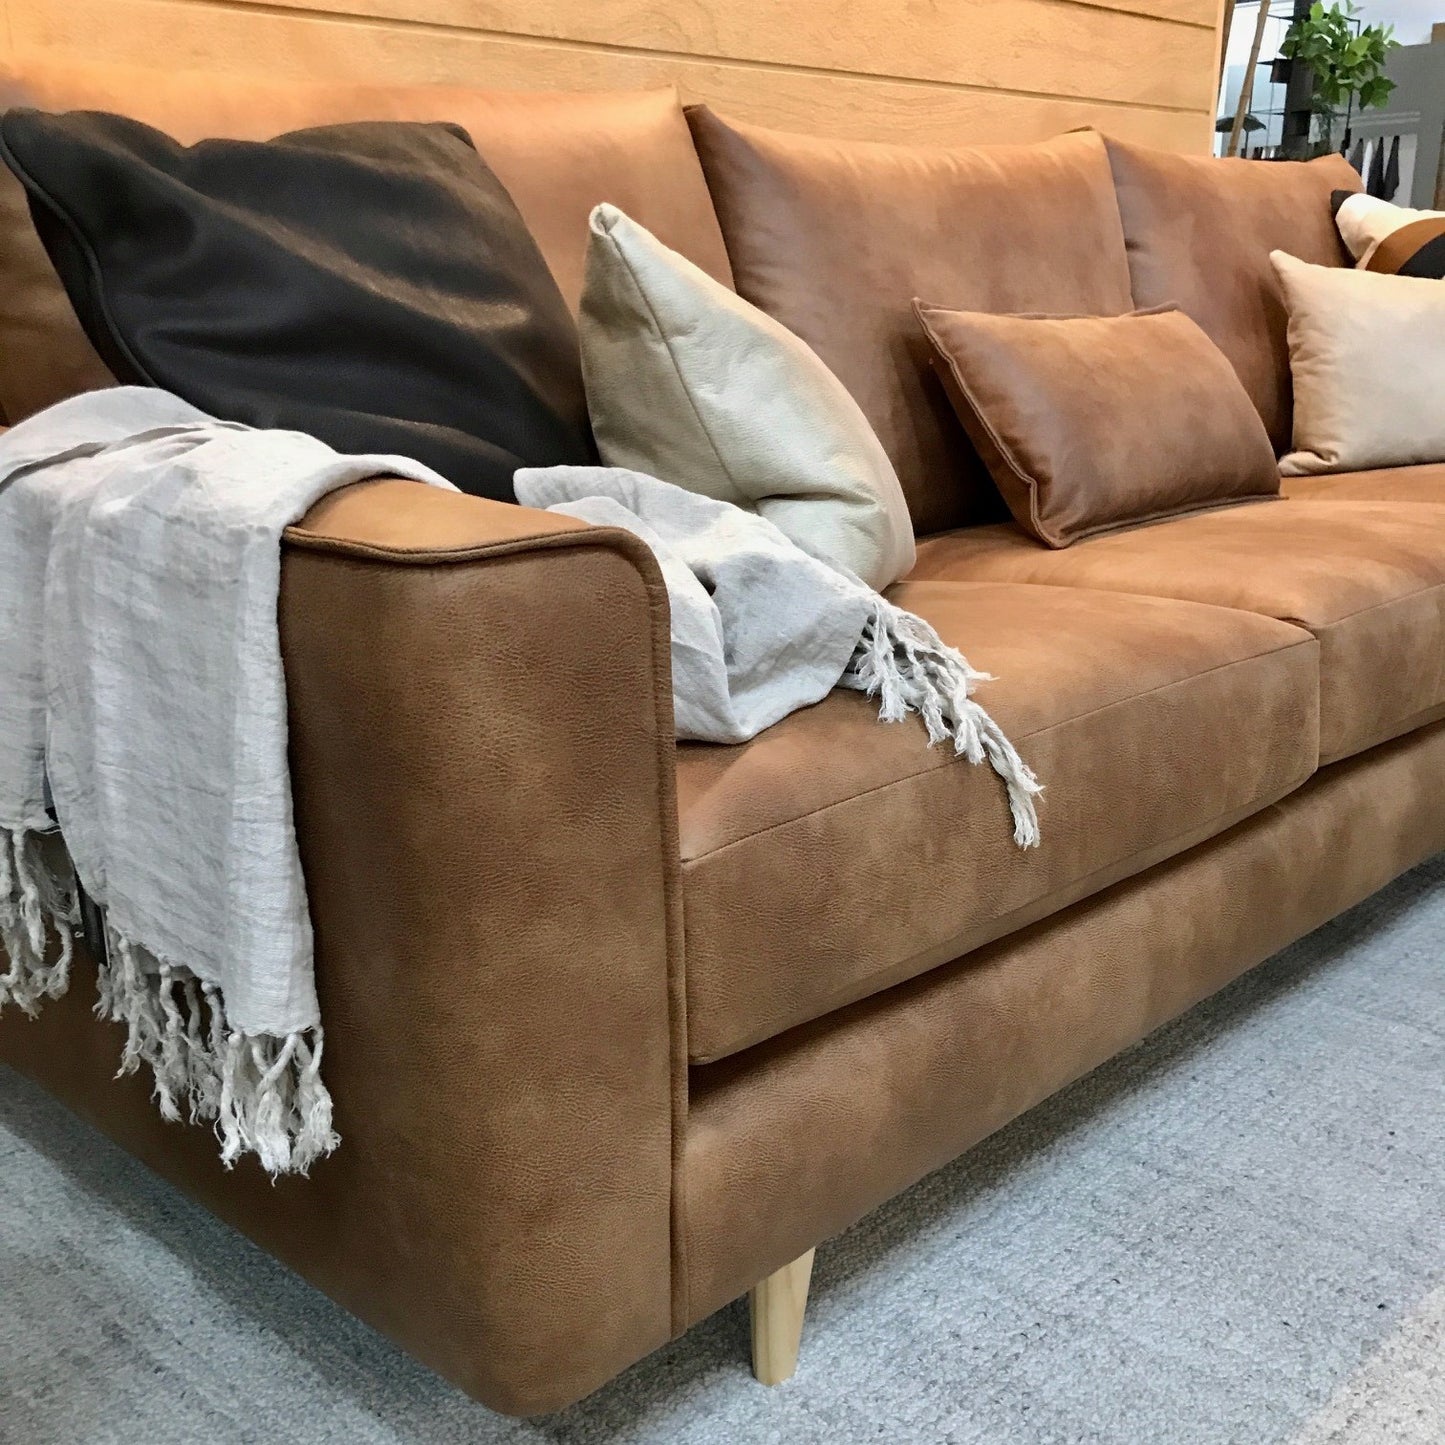 Alpine Sofa by Molmic available from Make Your House A Home, Furniture Store located in Bendigo, Victoria. Australian Made in Melbourne.